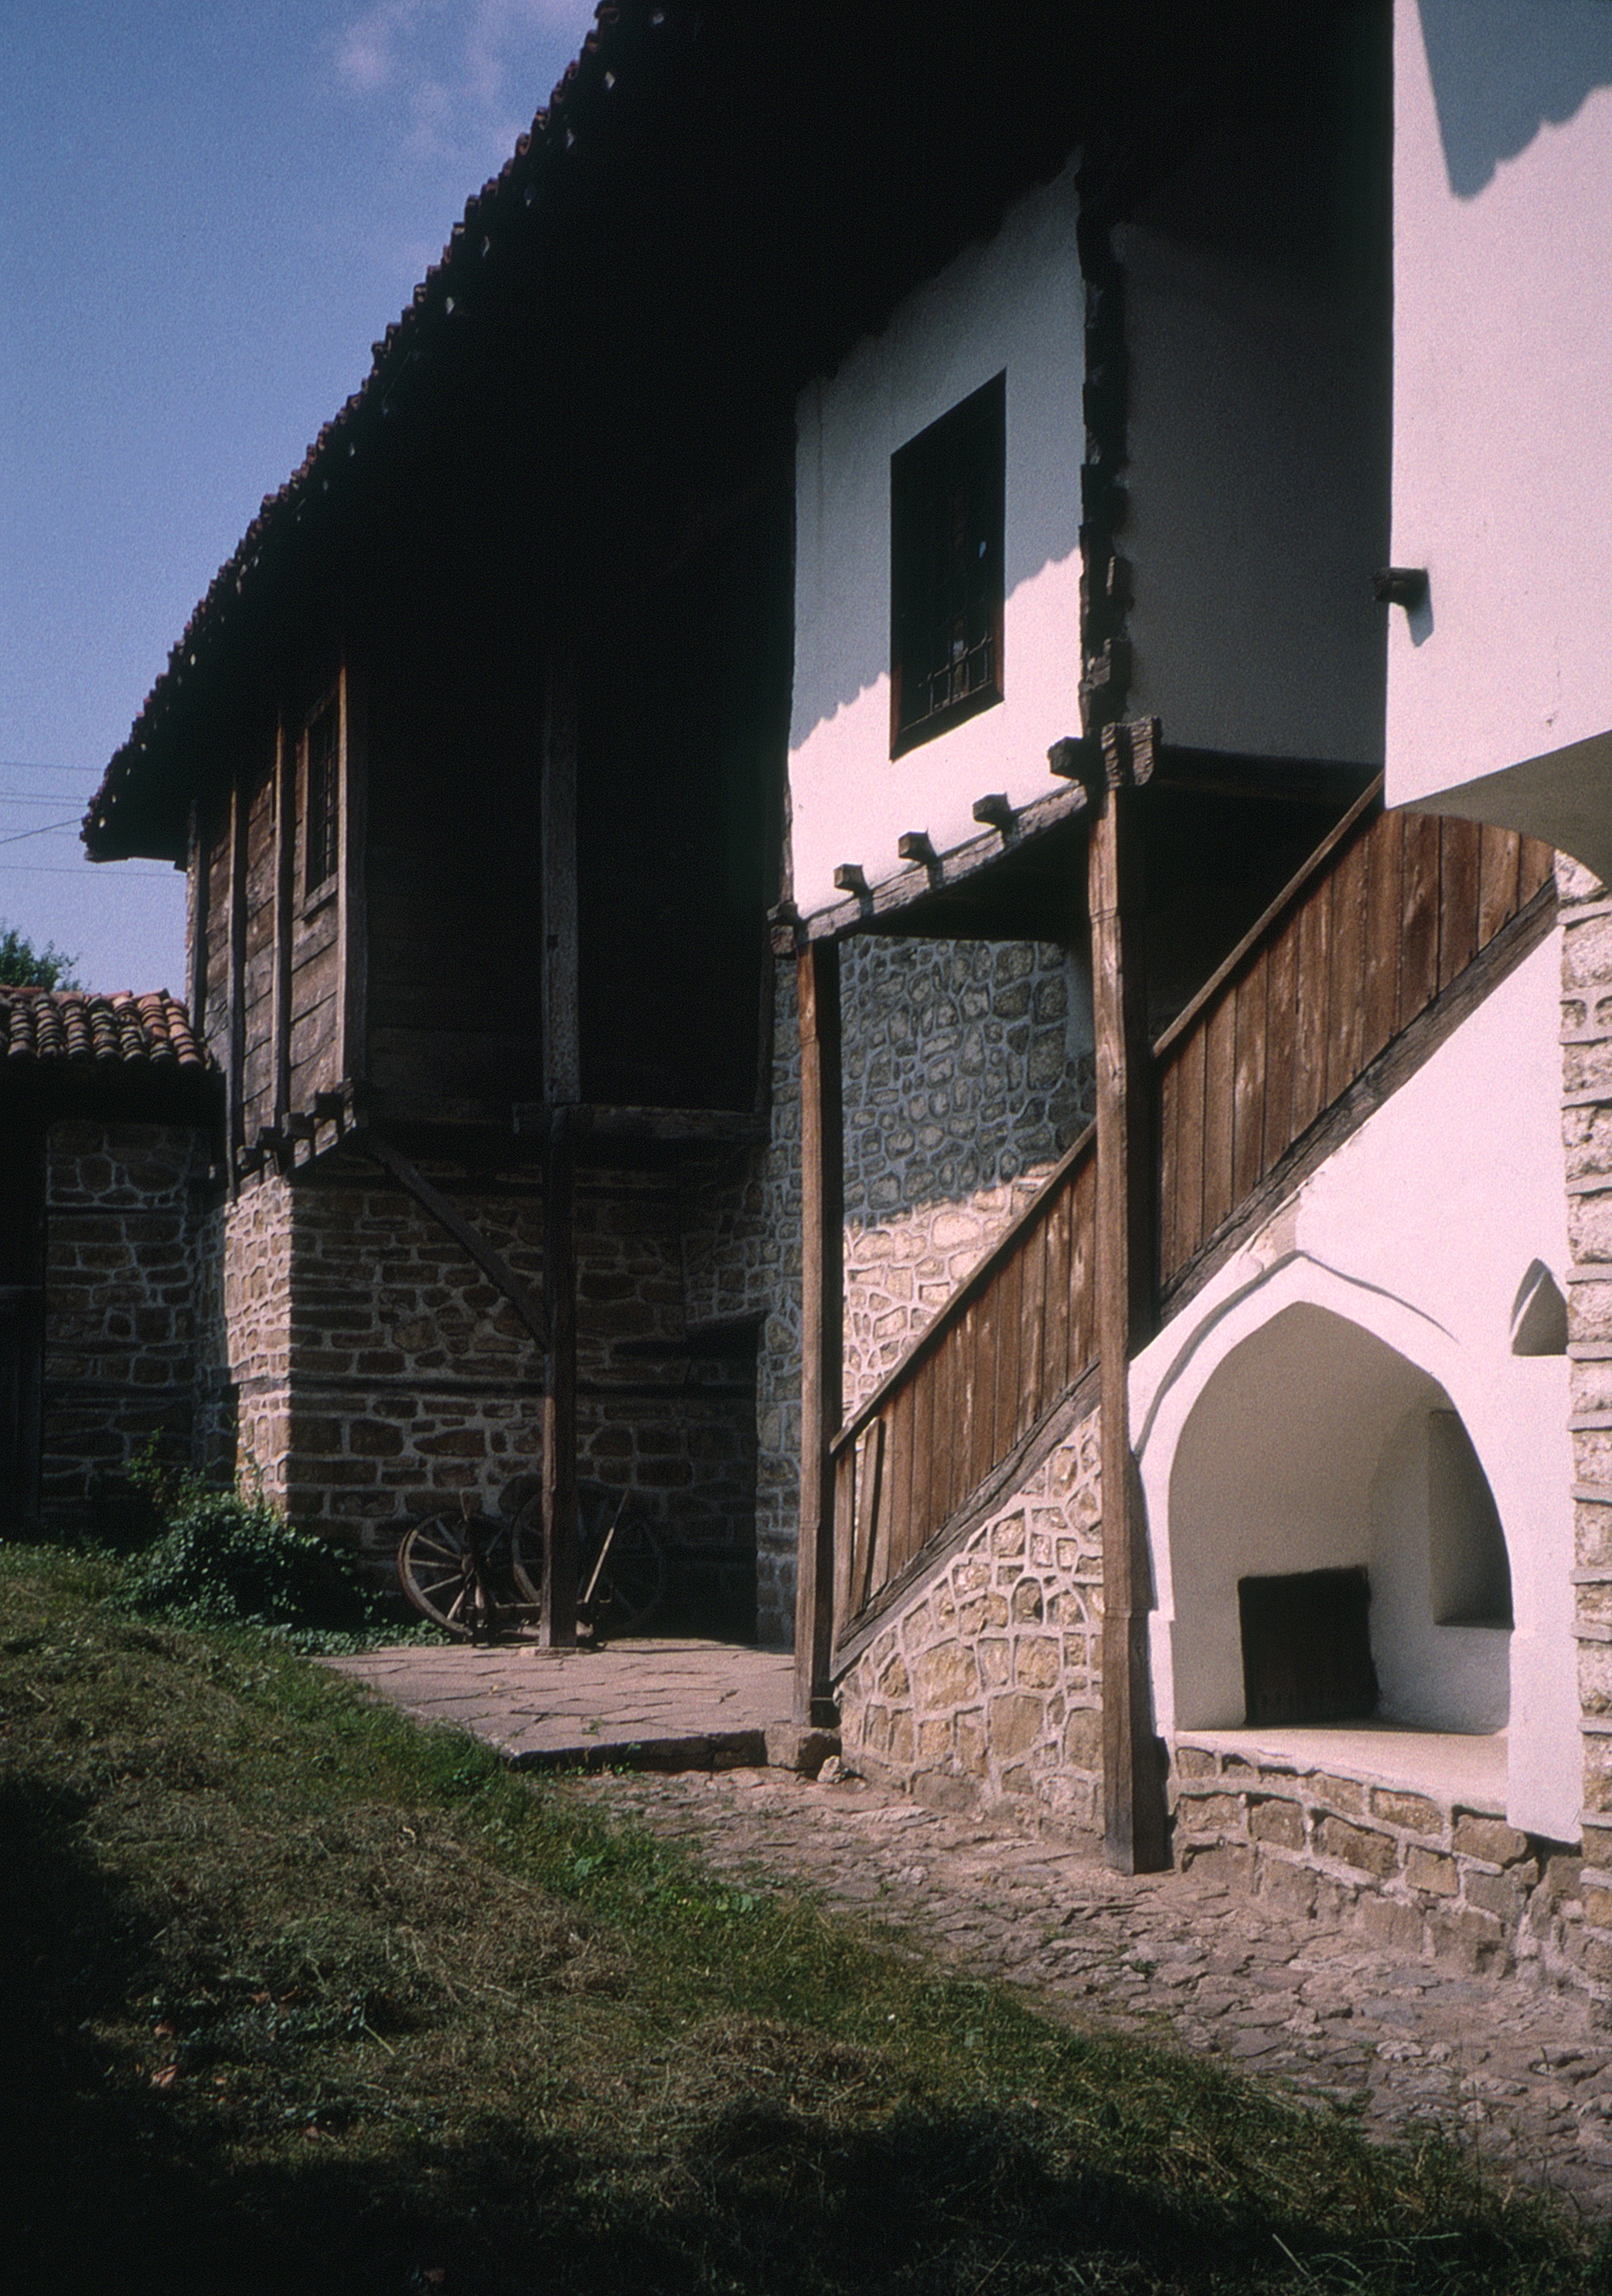 <p>This view shows the wood-framed upper level inside the courtyard; the plank enclosed volume contains the area for washing and personal hygiene. A stone wall forms a large courtyard and the ground level of the dwelling for defense. The dwelling is considered a mountain dwelling similar to those constructed during the feudal period (14th century). This rear area gives access by an open stair to a summer room above. The projecting element above the stair is part of a separate room provided for women about to give birth and during the weeks after.</p><p>(photo 2000)</p>